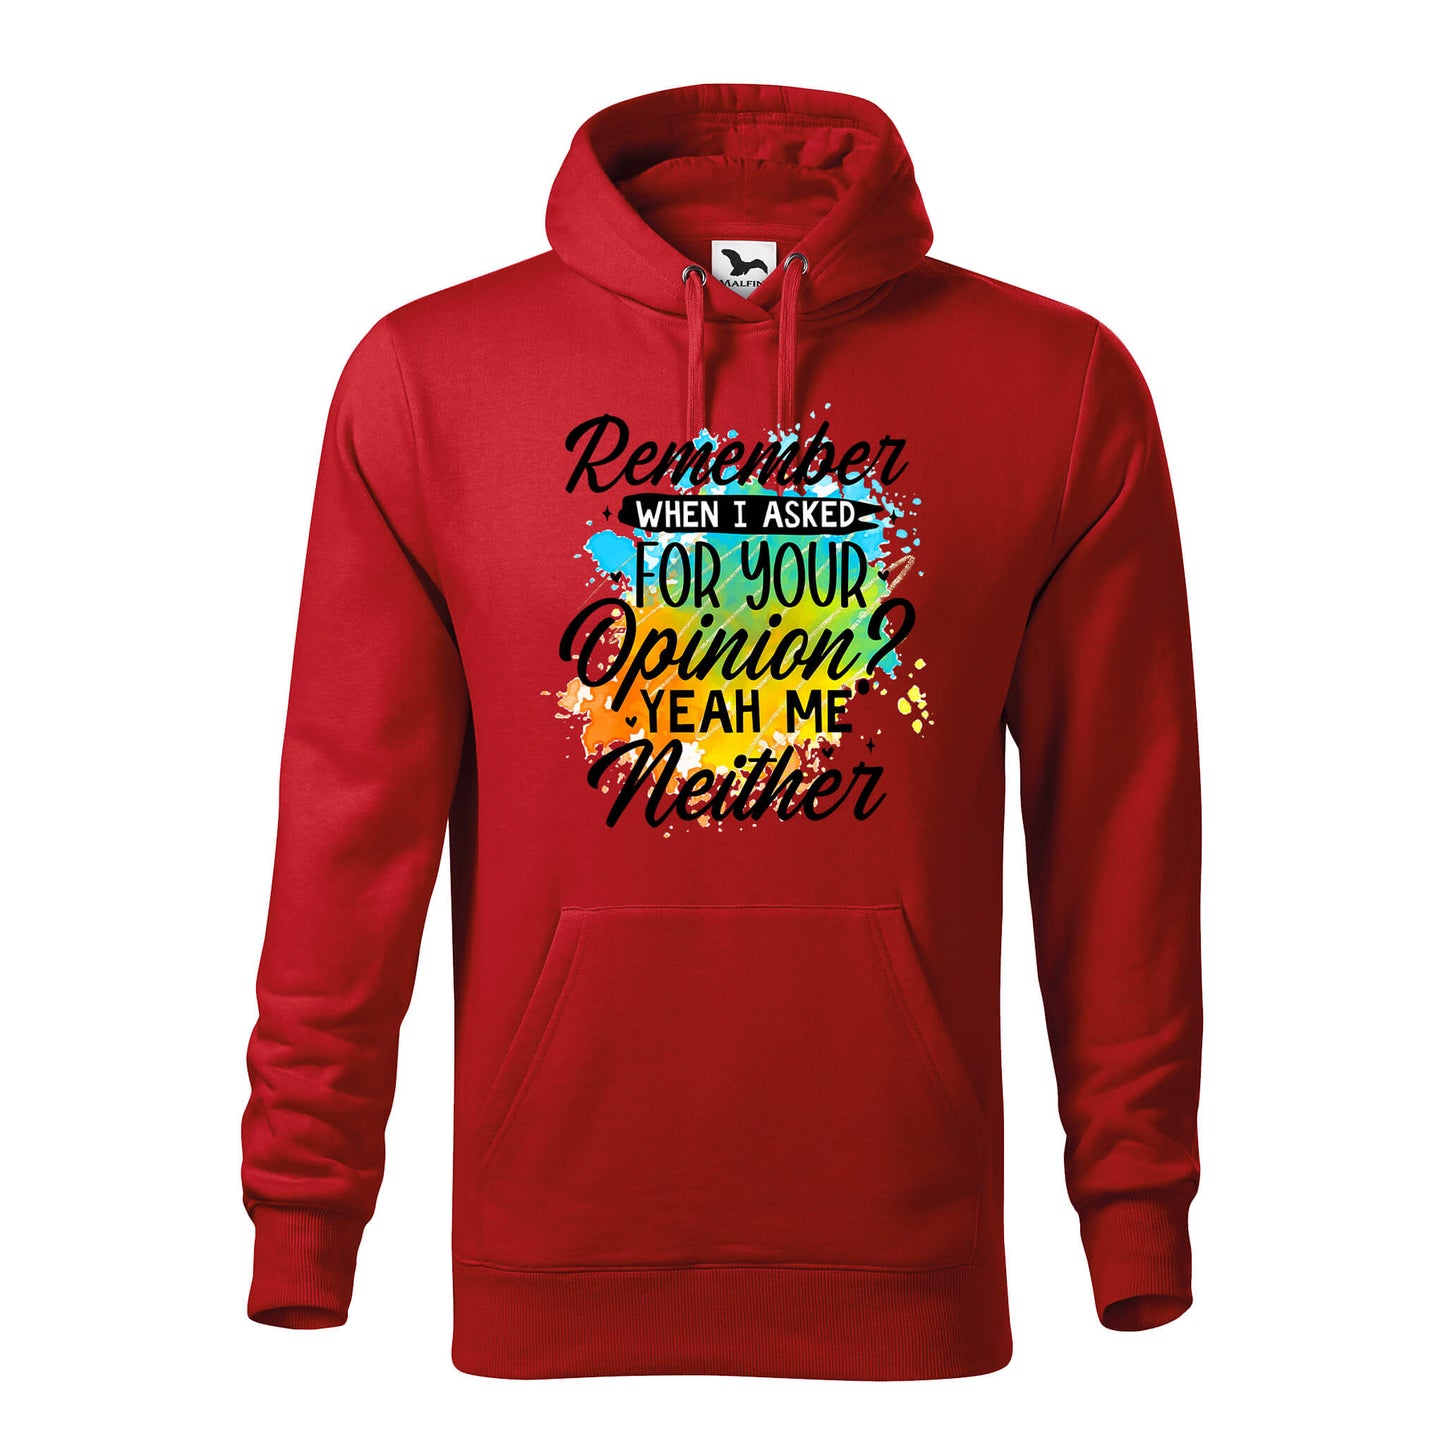 Remember when i asked for your opinion hoodie - rvdesignprint